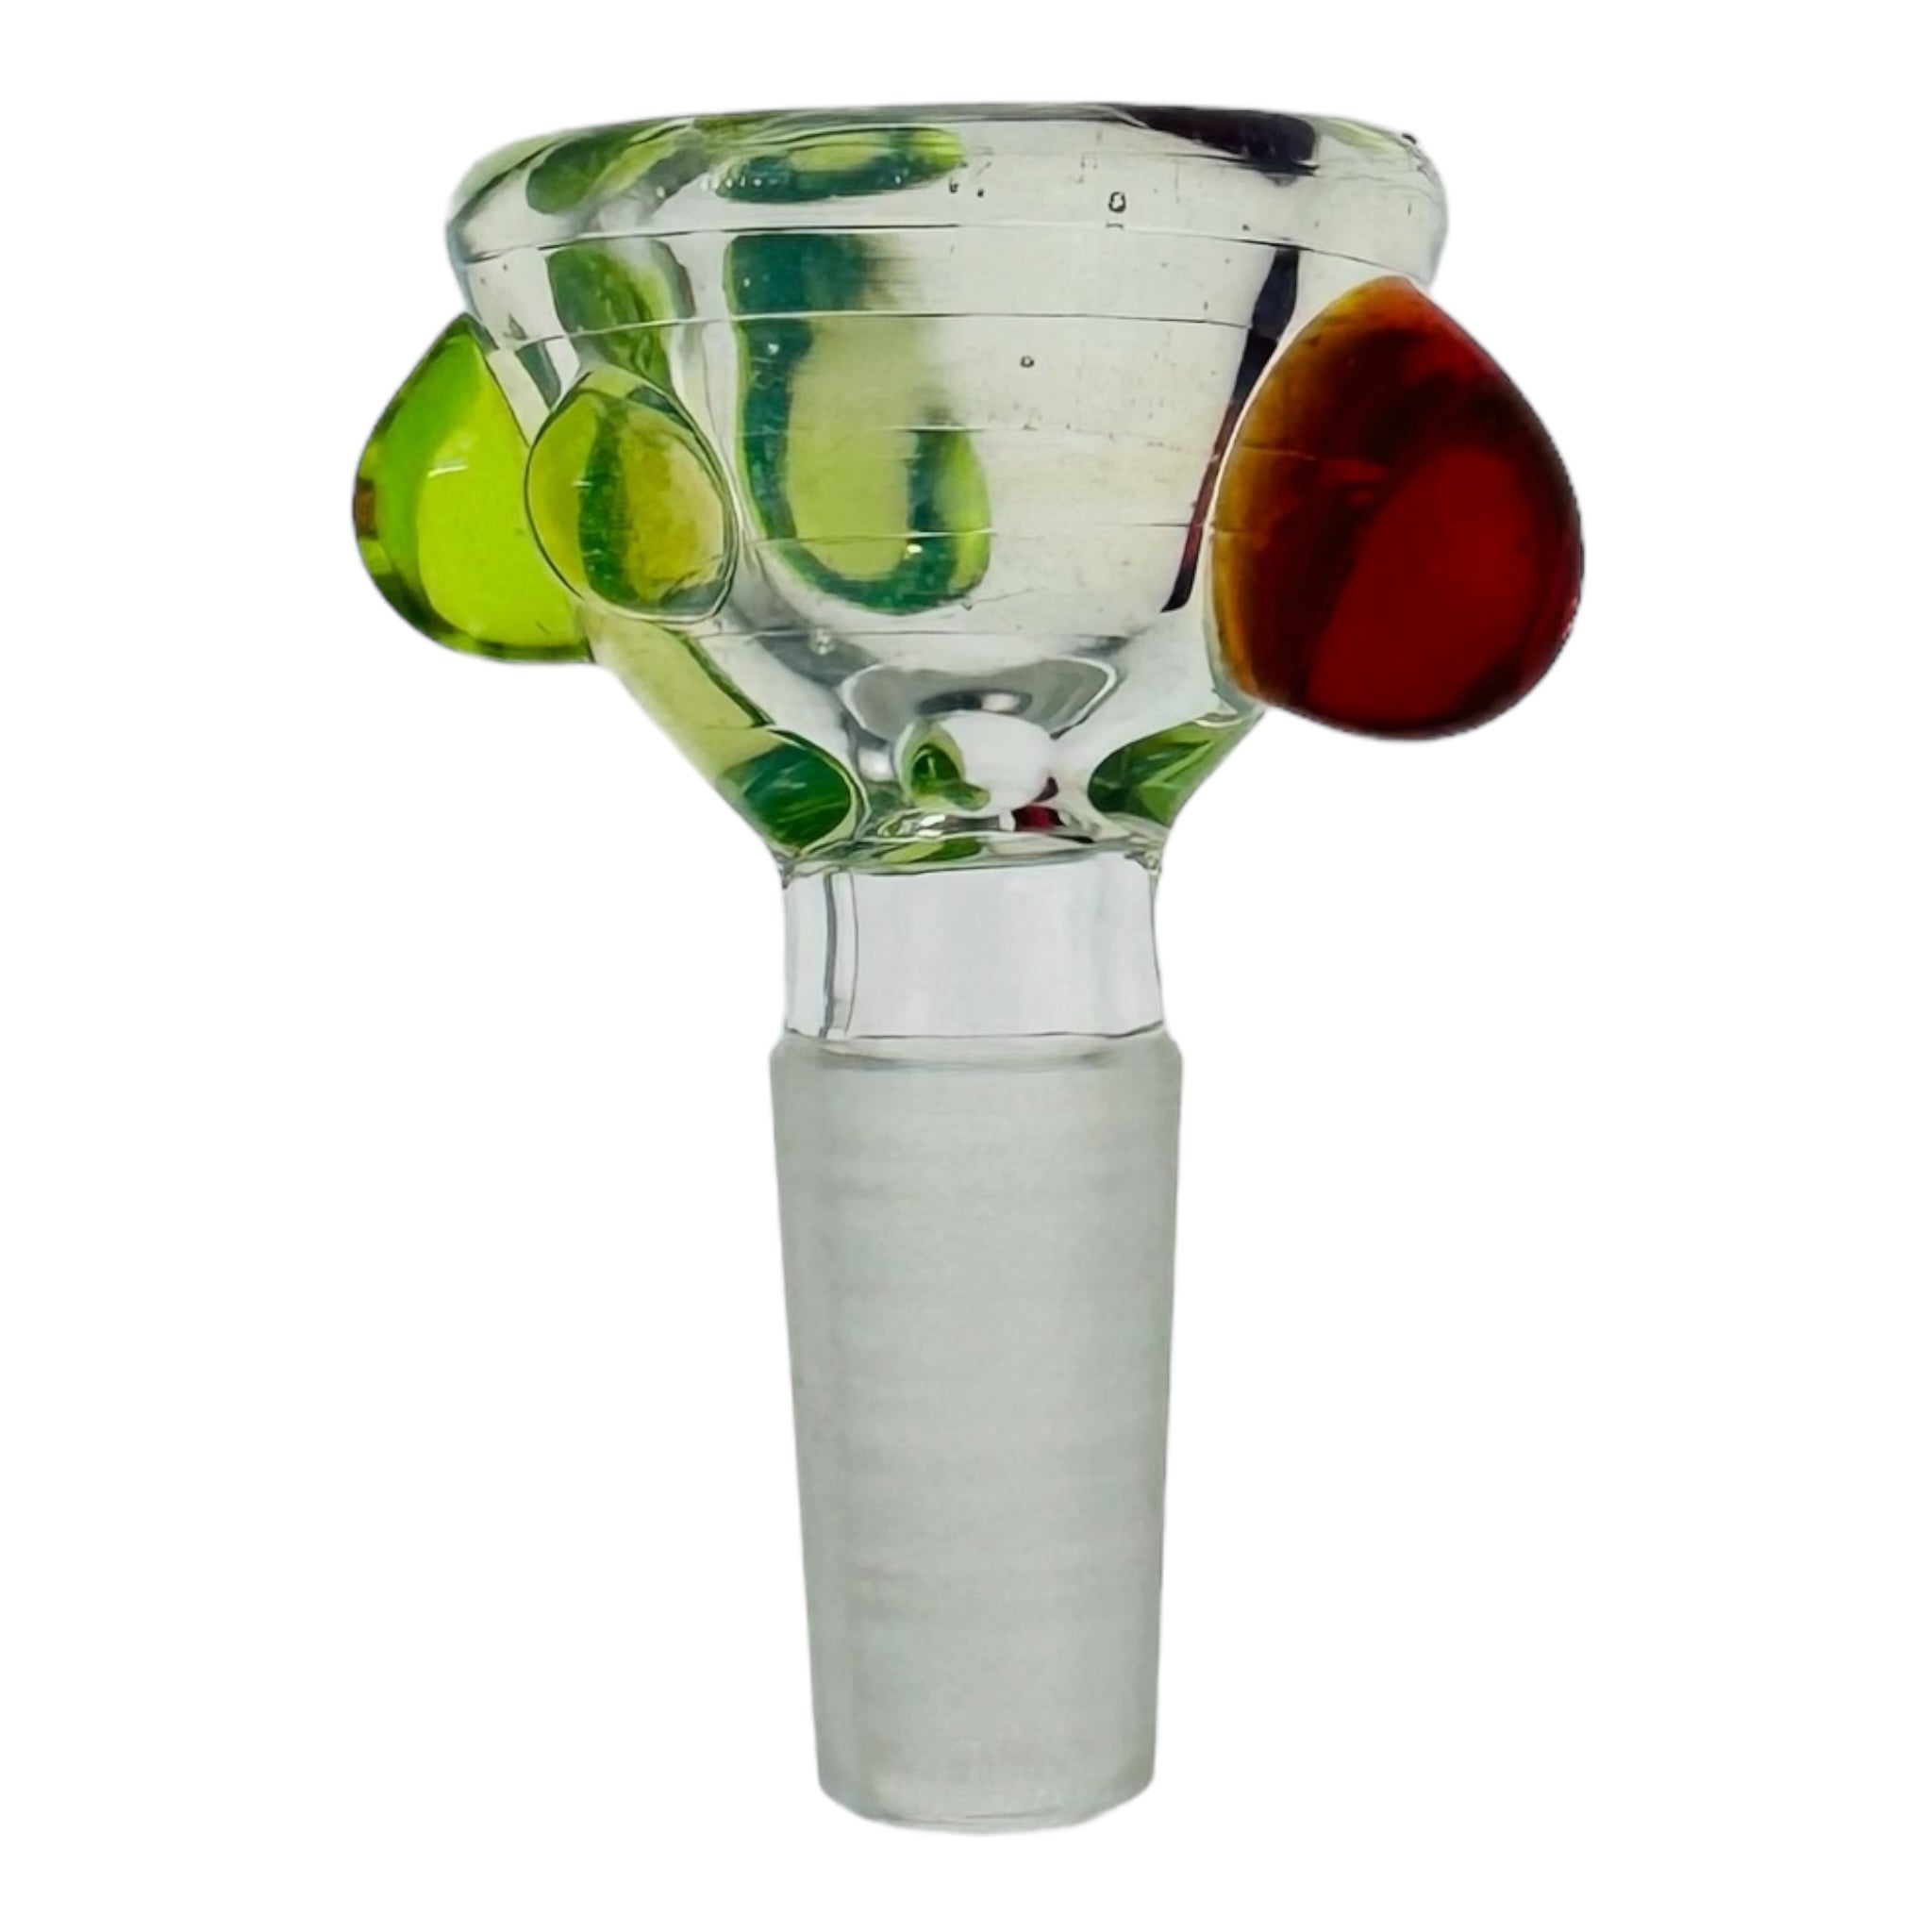 Arko Glass 10mm Bong Bowl For Weed Clear Mystic Bowl With Green And Red Dots